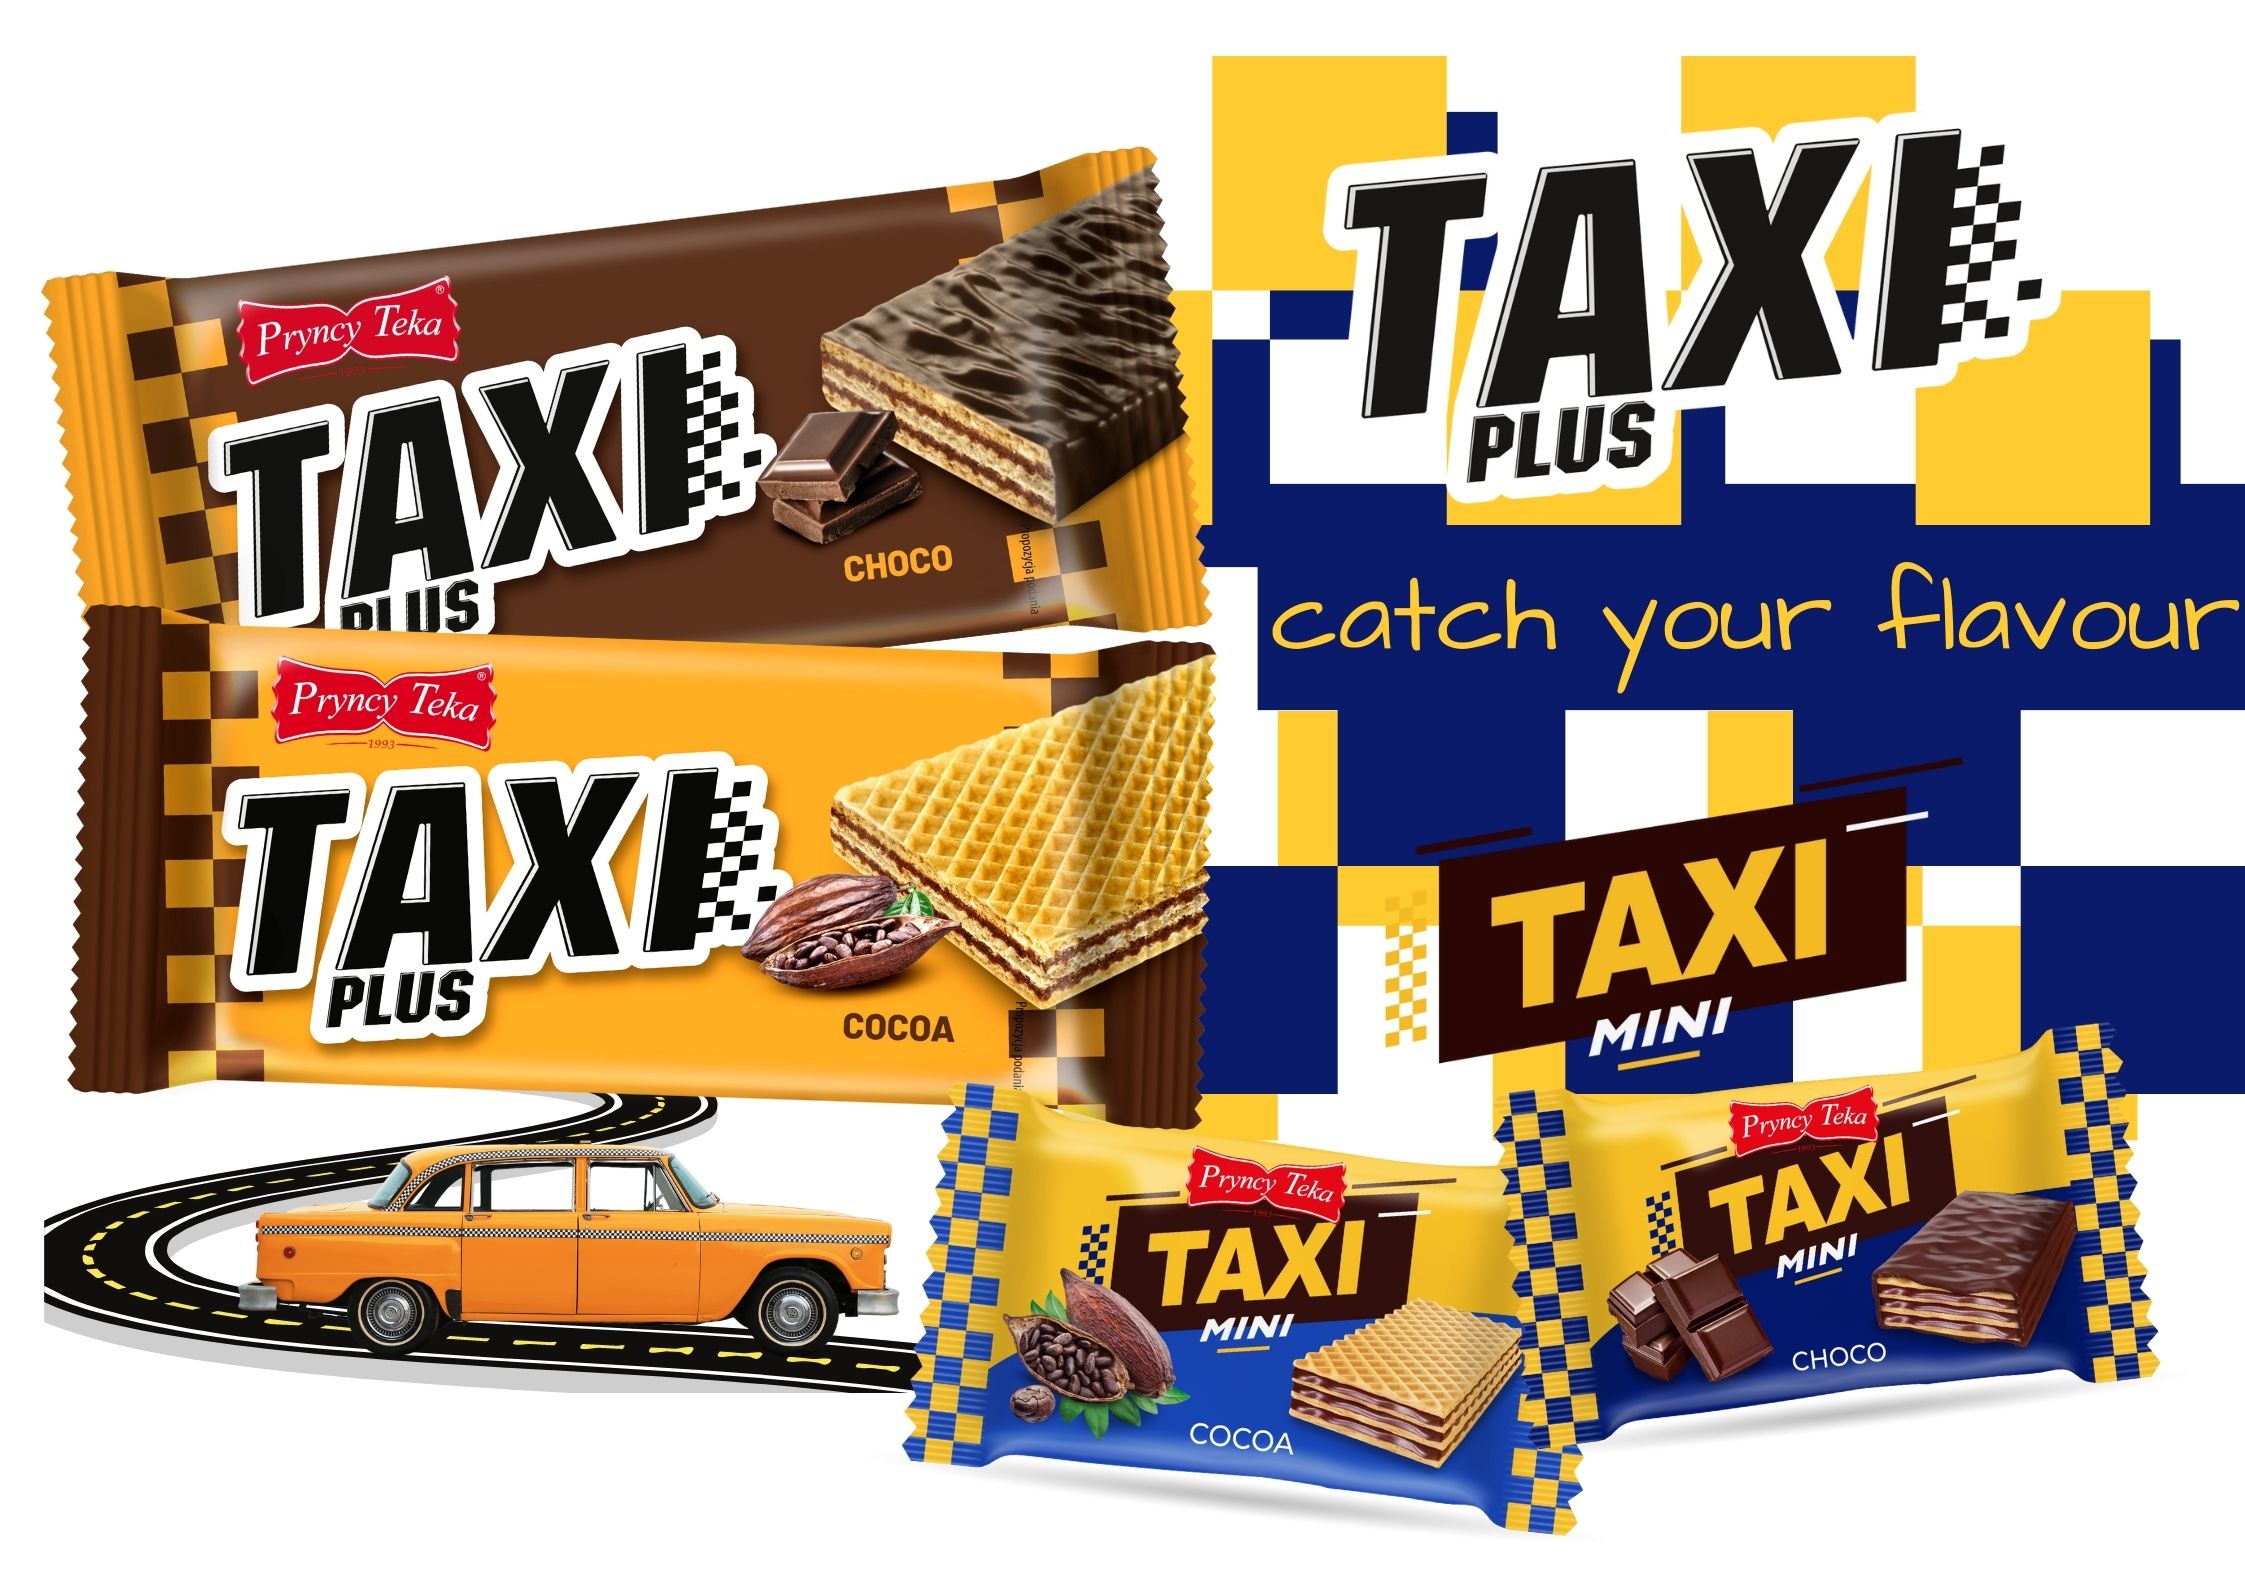 TAXI Plus and TAXI mini wafers